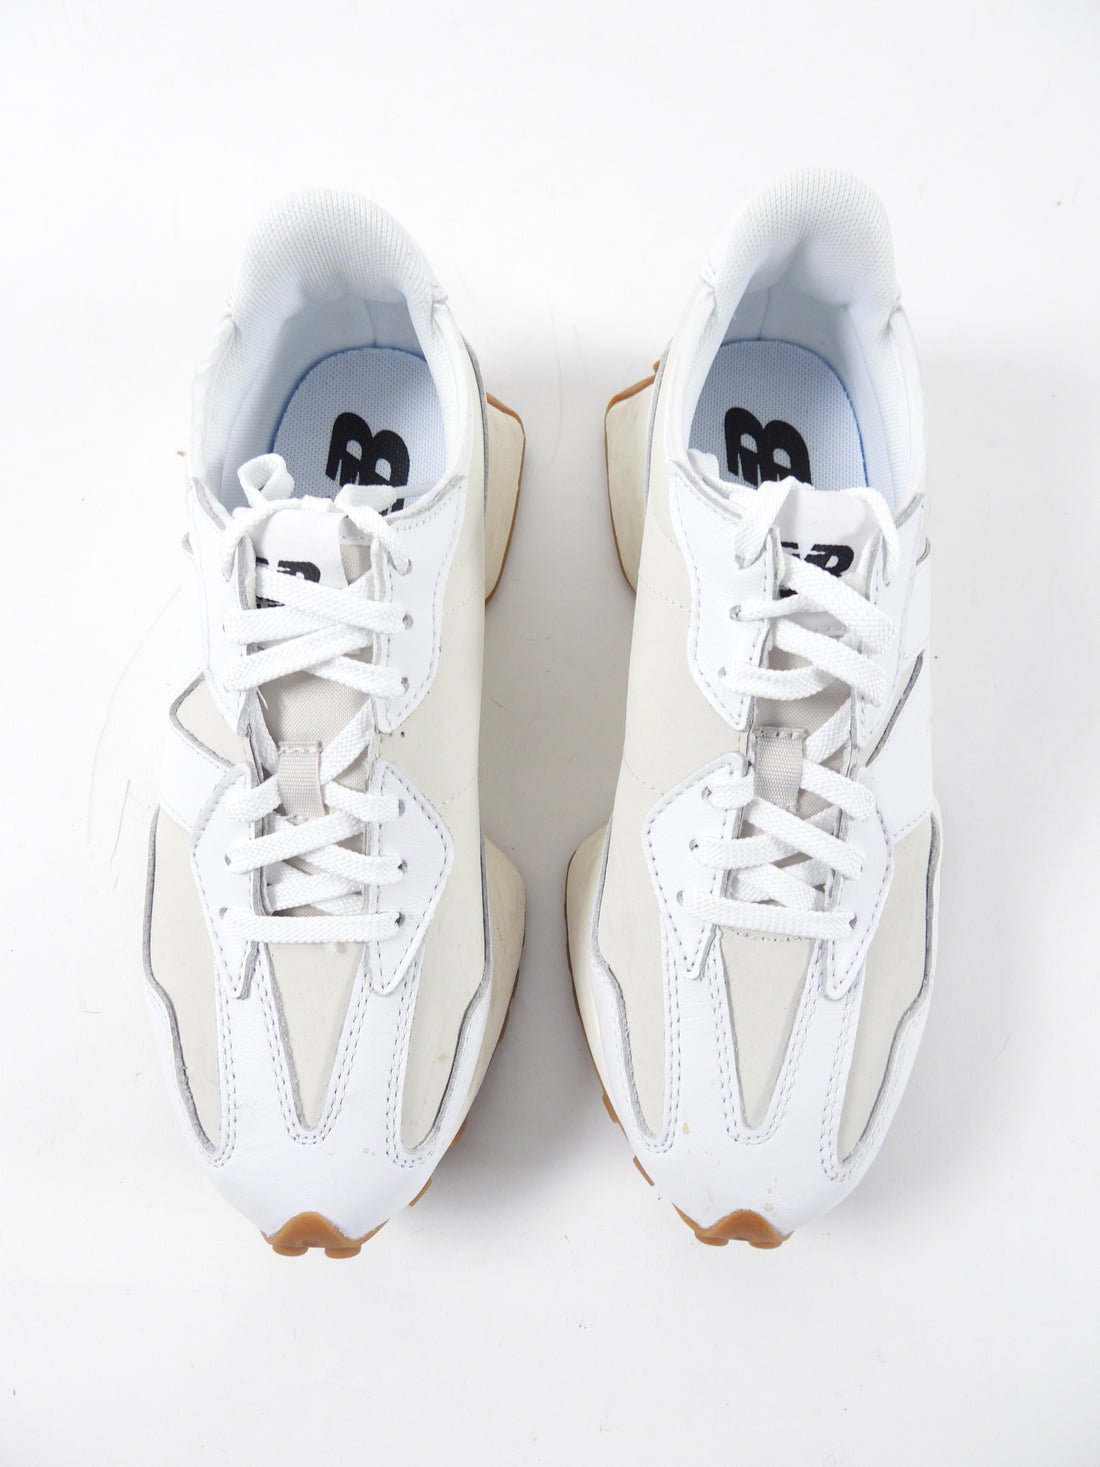 New Balance 327 White and Natural Rubber Sneakers - 6.5